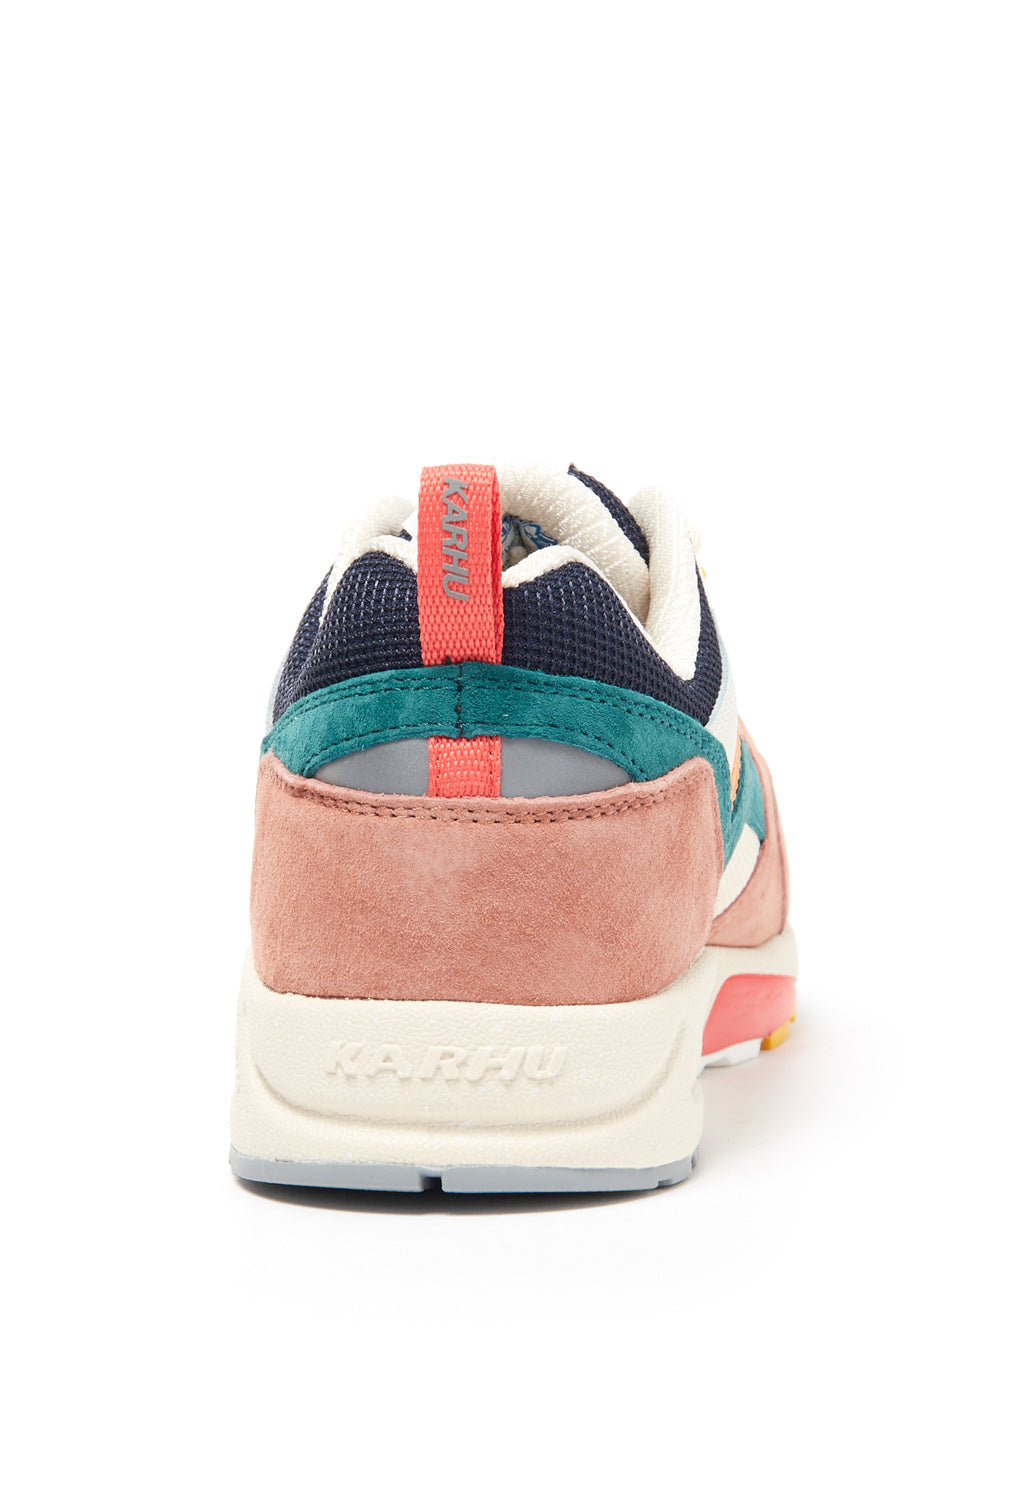 Karhu Fusion 2.0 Trainers - Lily White / Piquant Green